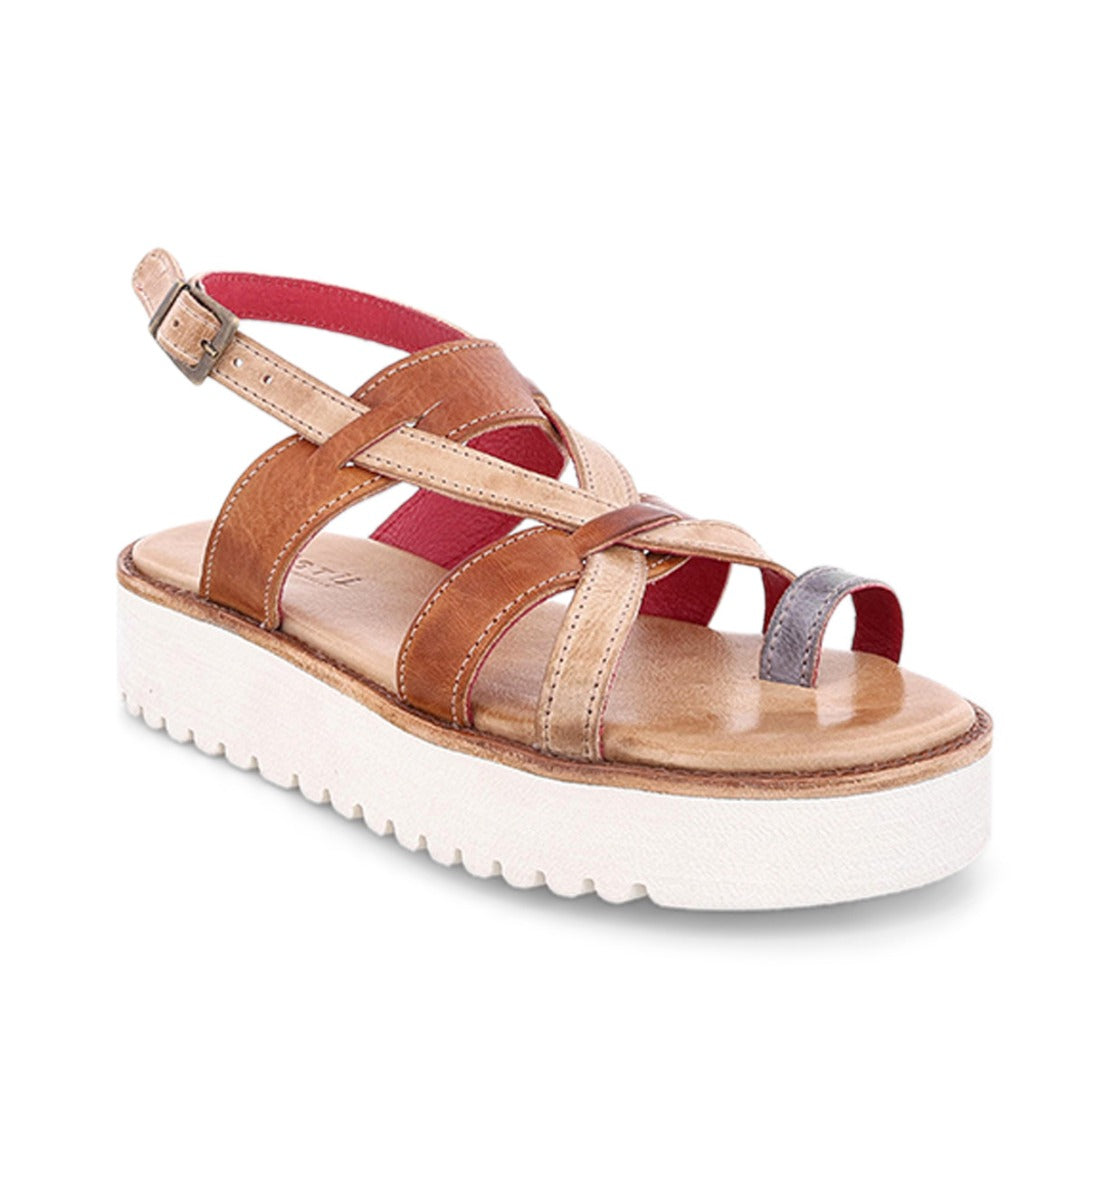 A Bed Stu Crawler women's sandal with two straps and a white sole.